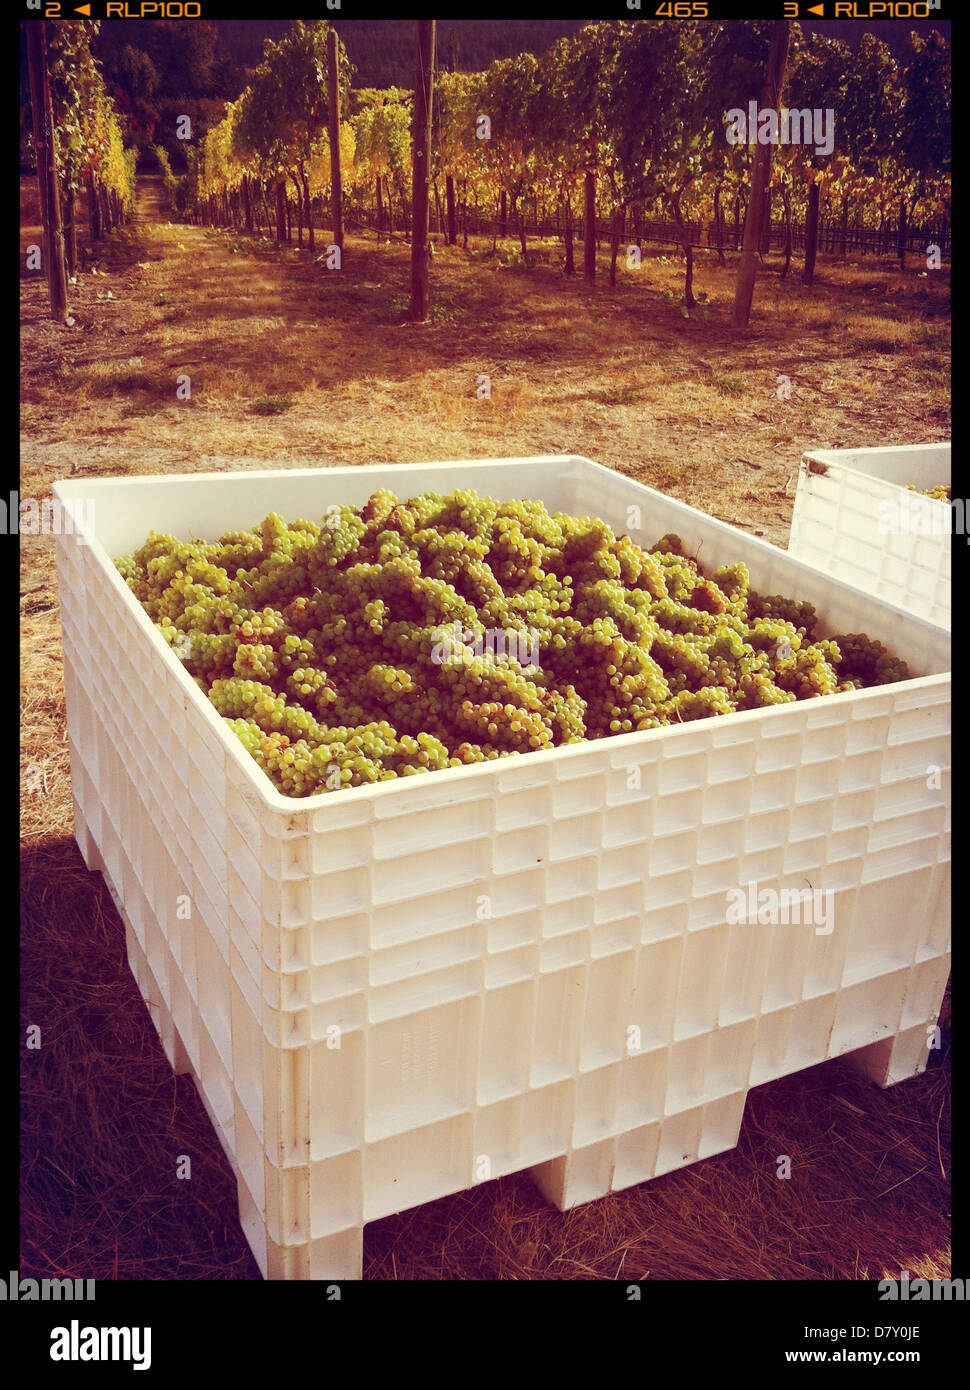 Crate of green grapes in vineyard Stock Photo